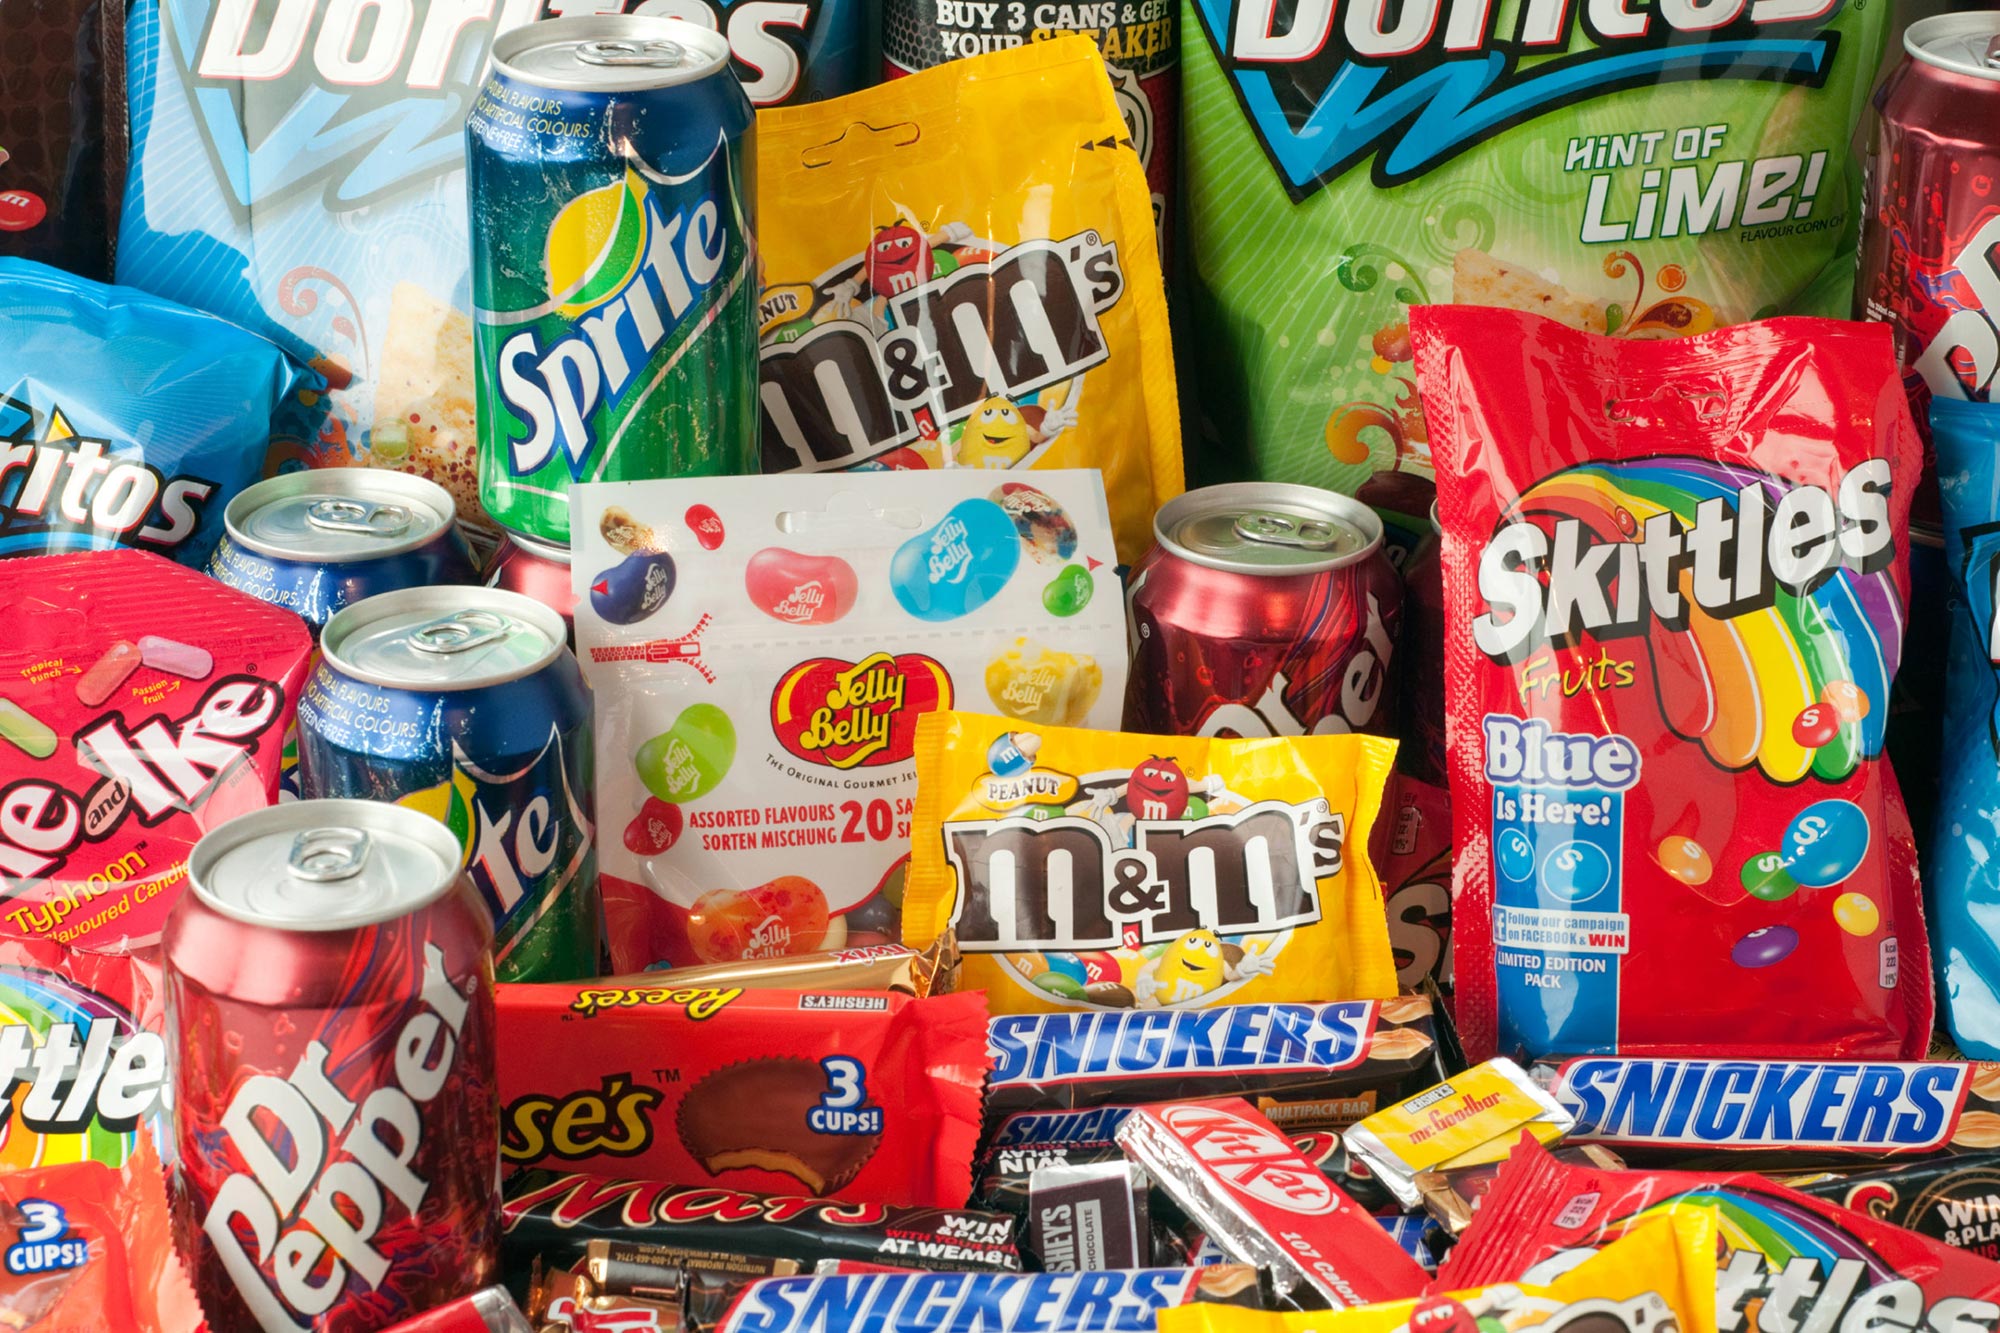 ADHD, Bipolar, and Aggressive Behavior May Be Driven by High Fructose Intake - SciTechDaily